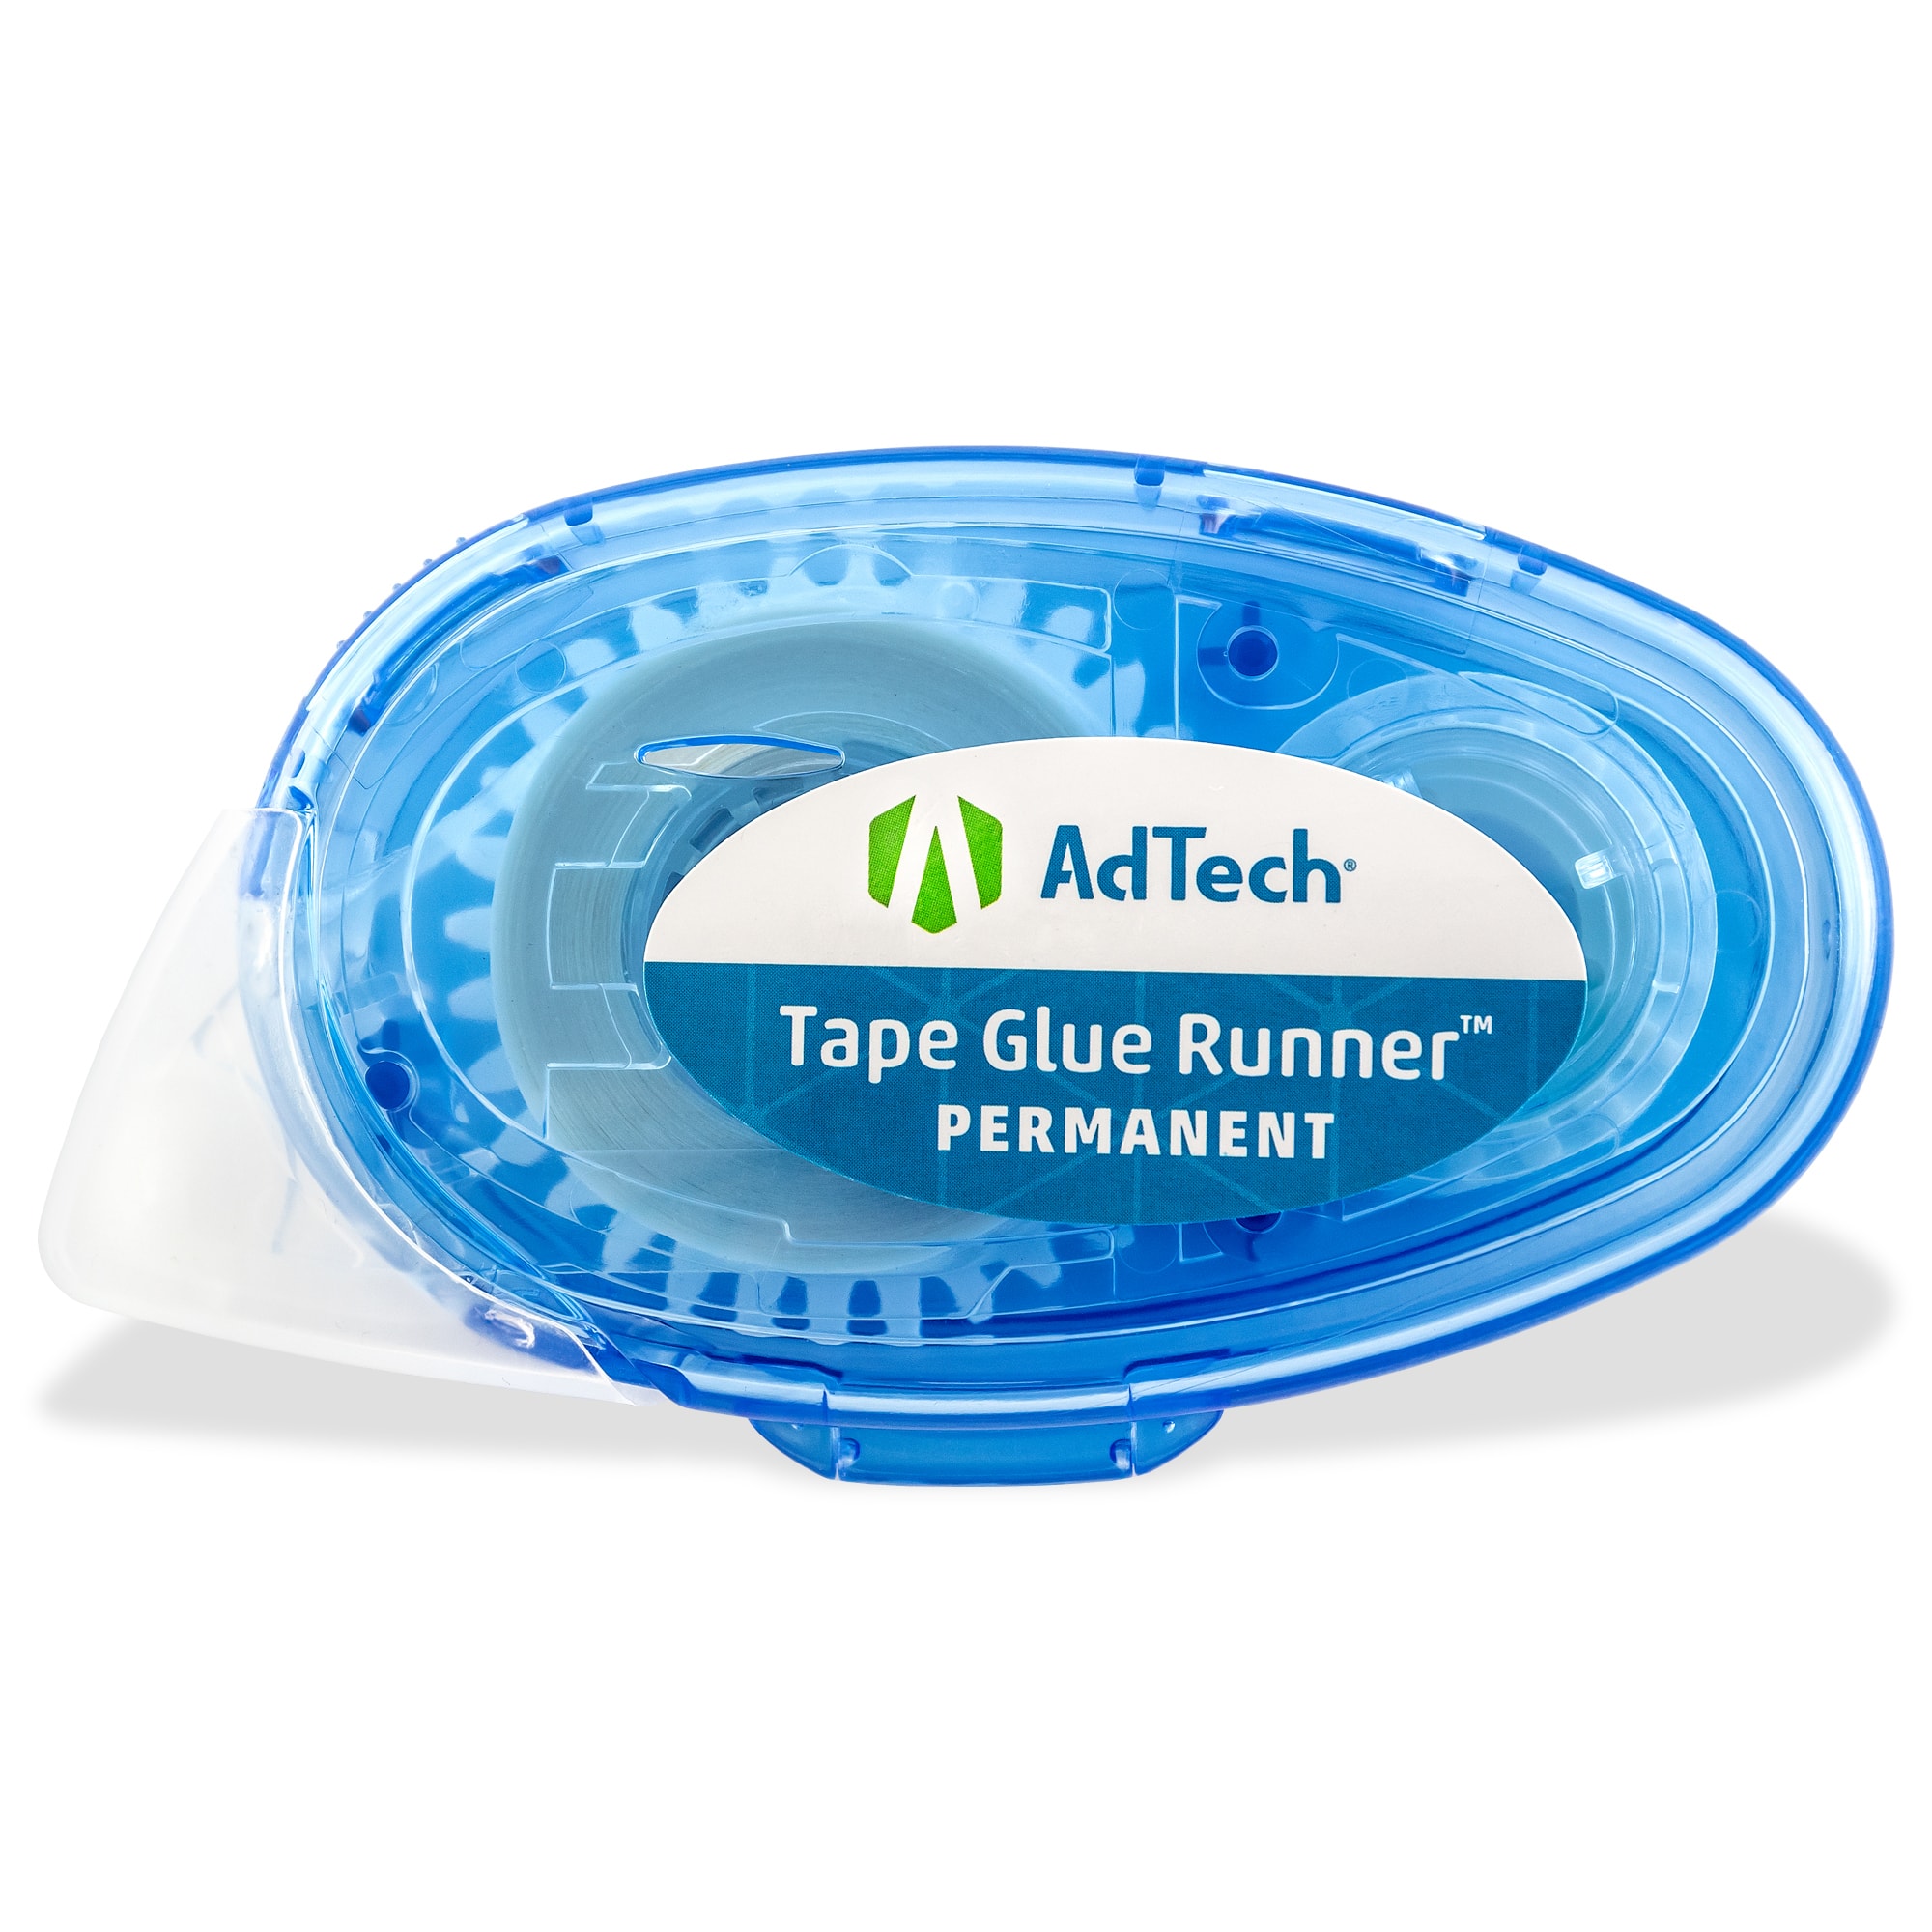 Shop for the Ad tech™ Crafter's Tape™ Value 4 Pack at Michaels